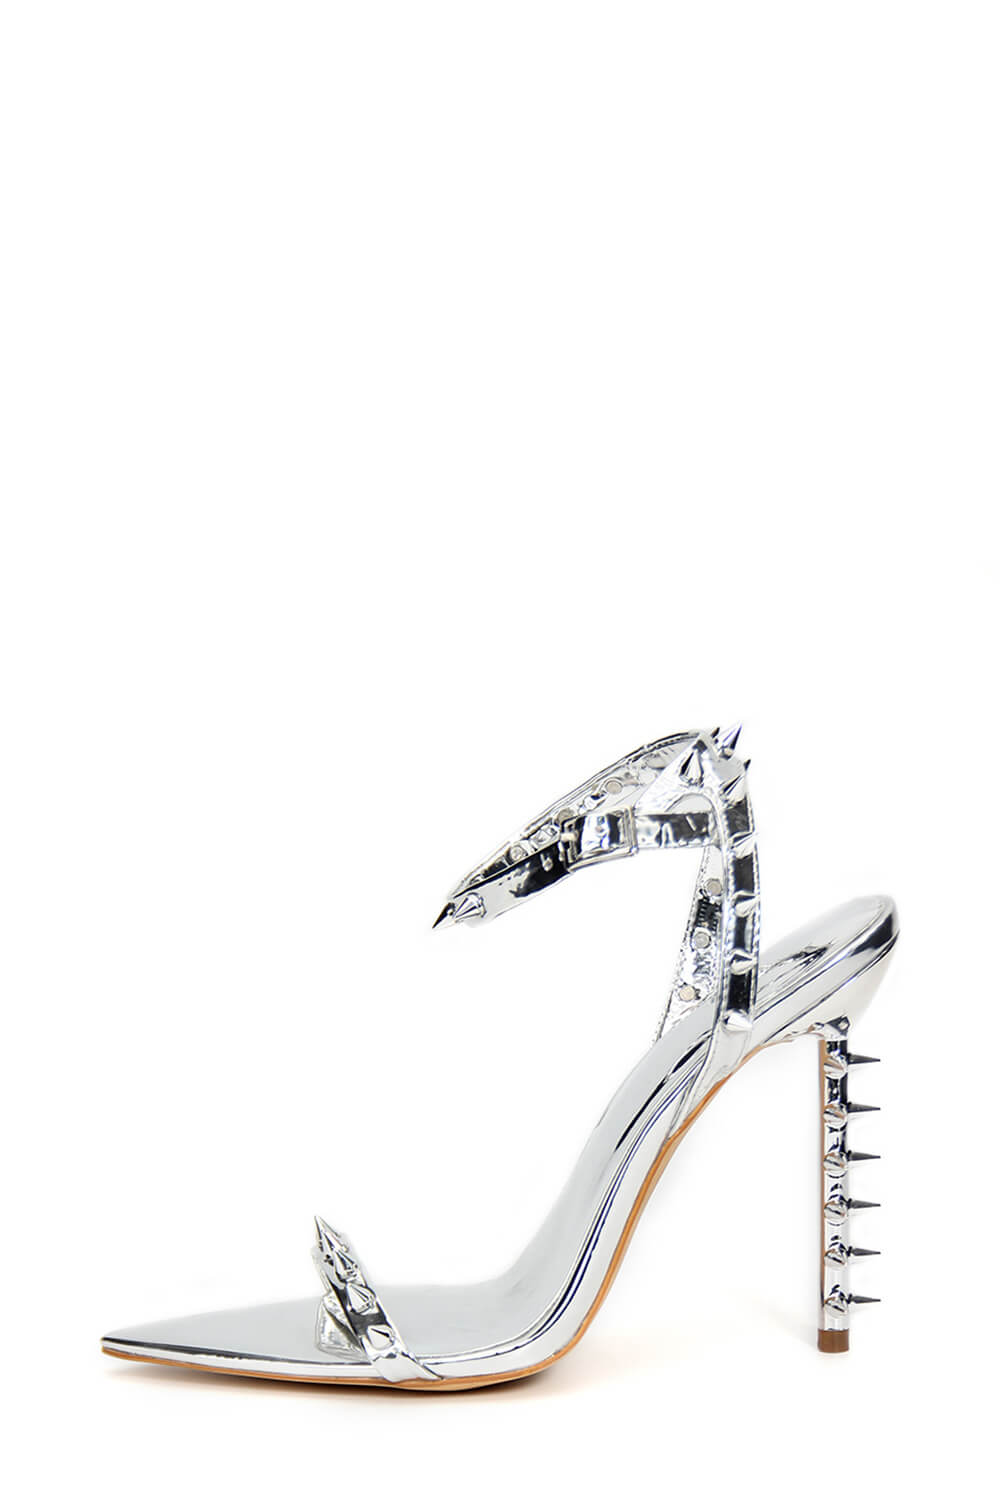 Spiked Studs Open Pointed Toe Stiletto Heeled Ankle Sandals - Silver